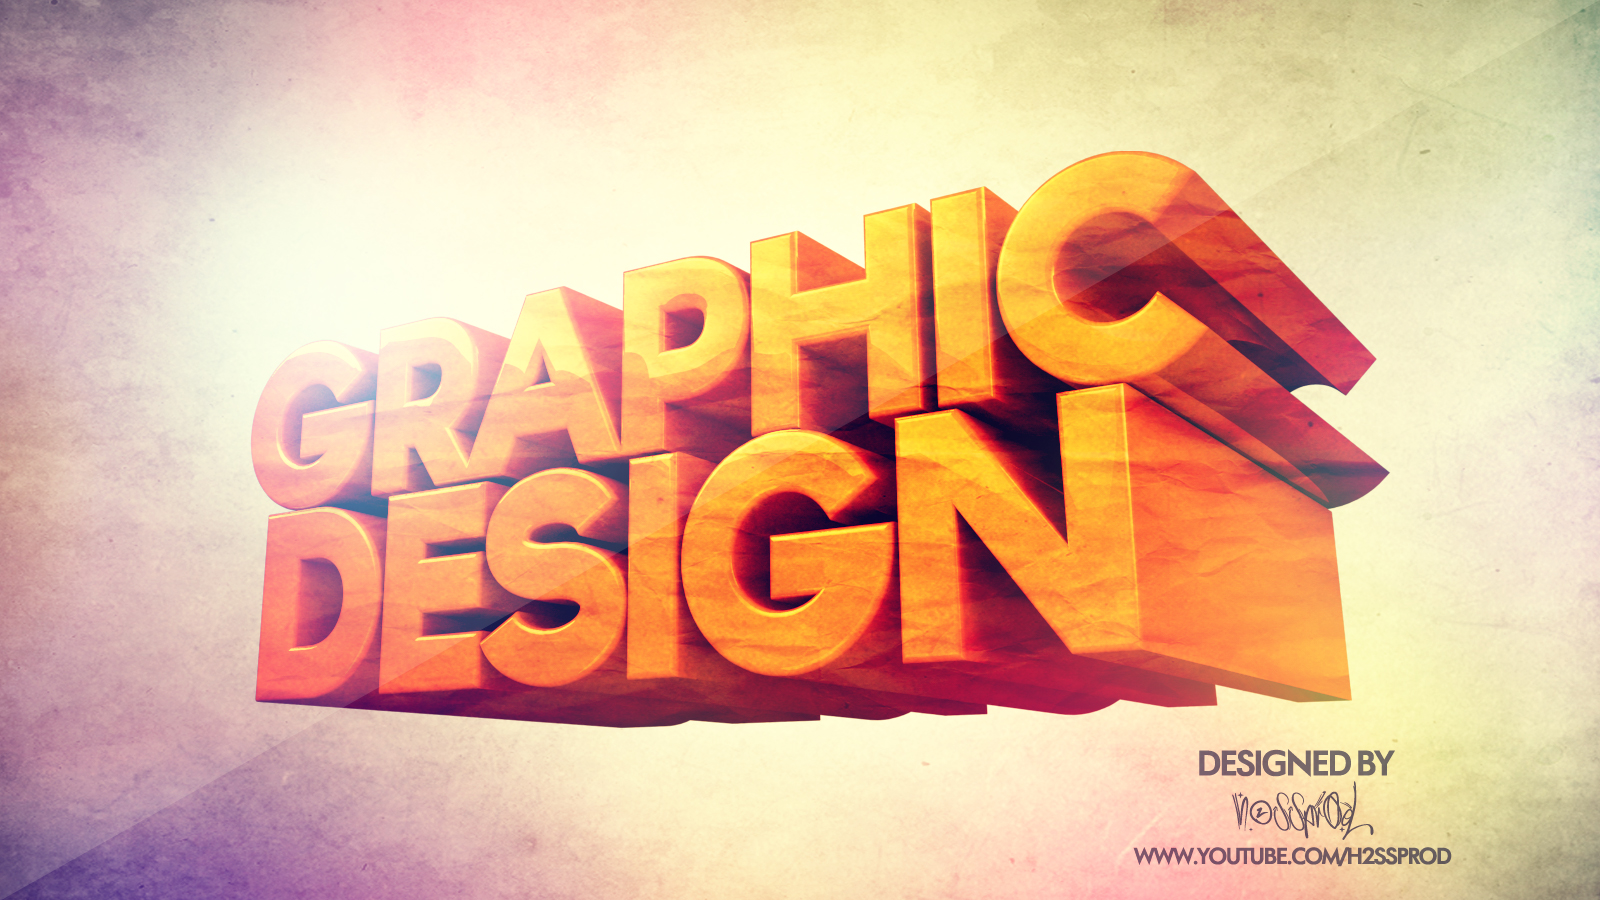 Wallpaper Graphic Design 3d By H2ssprod